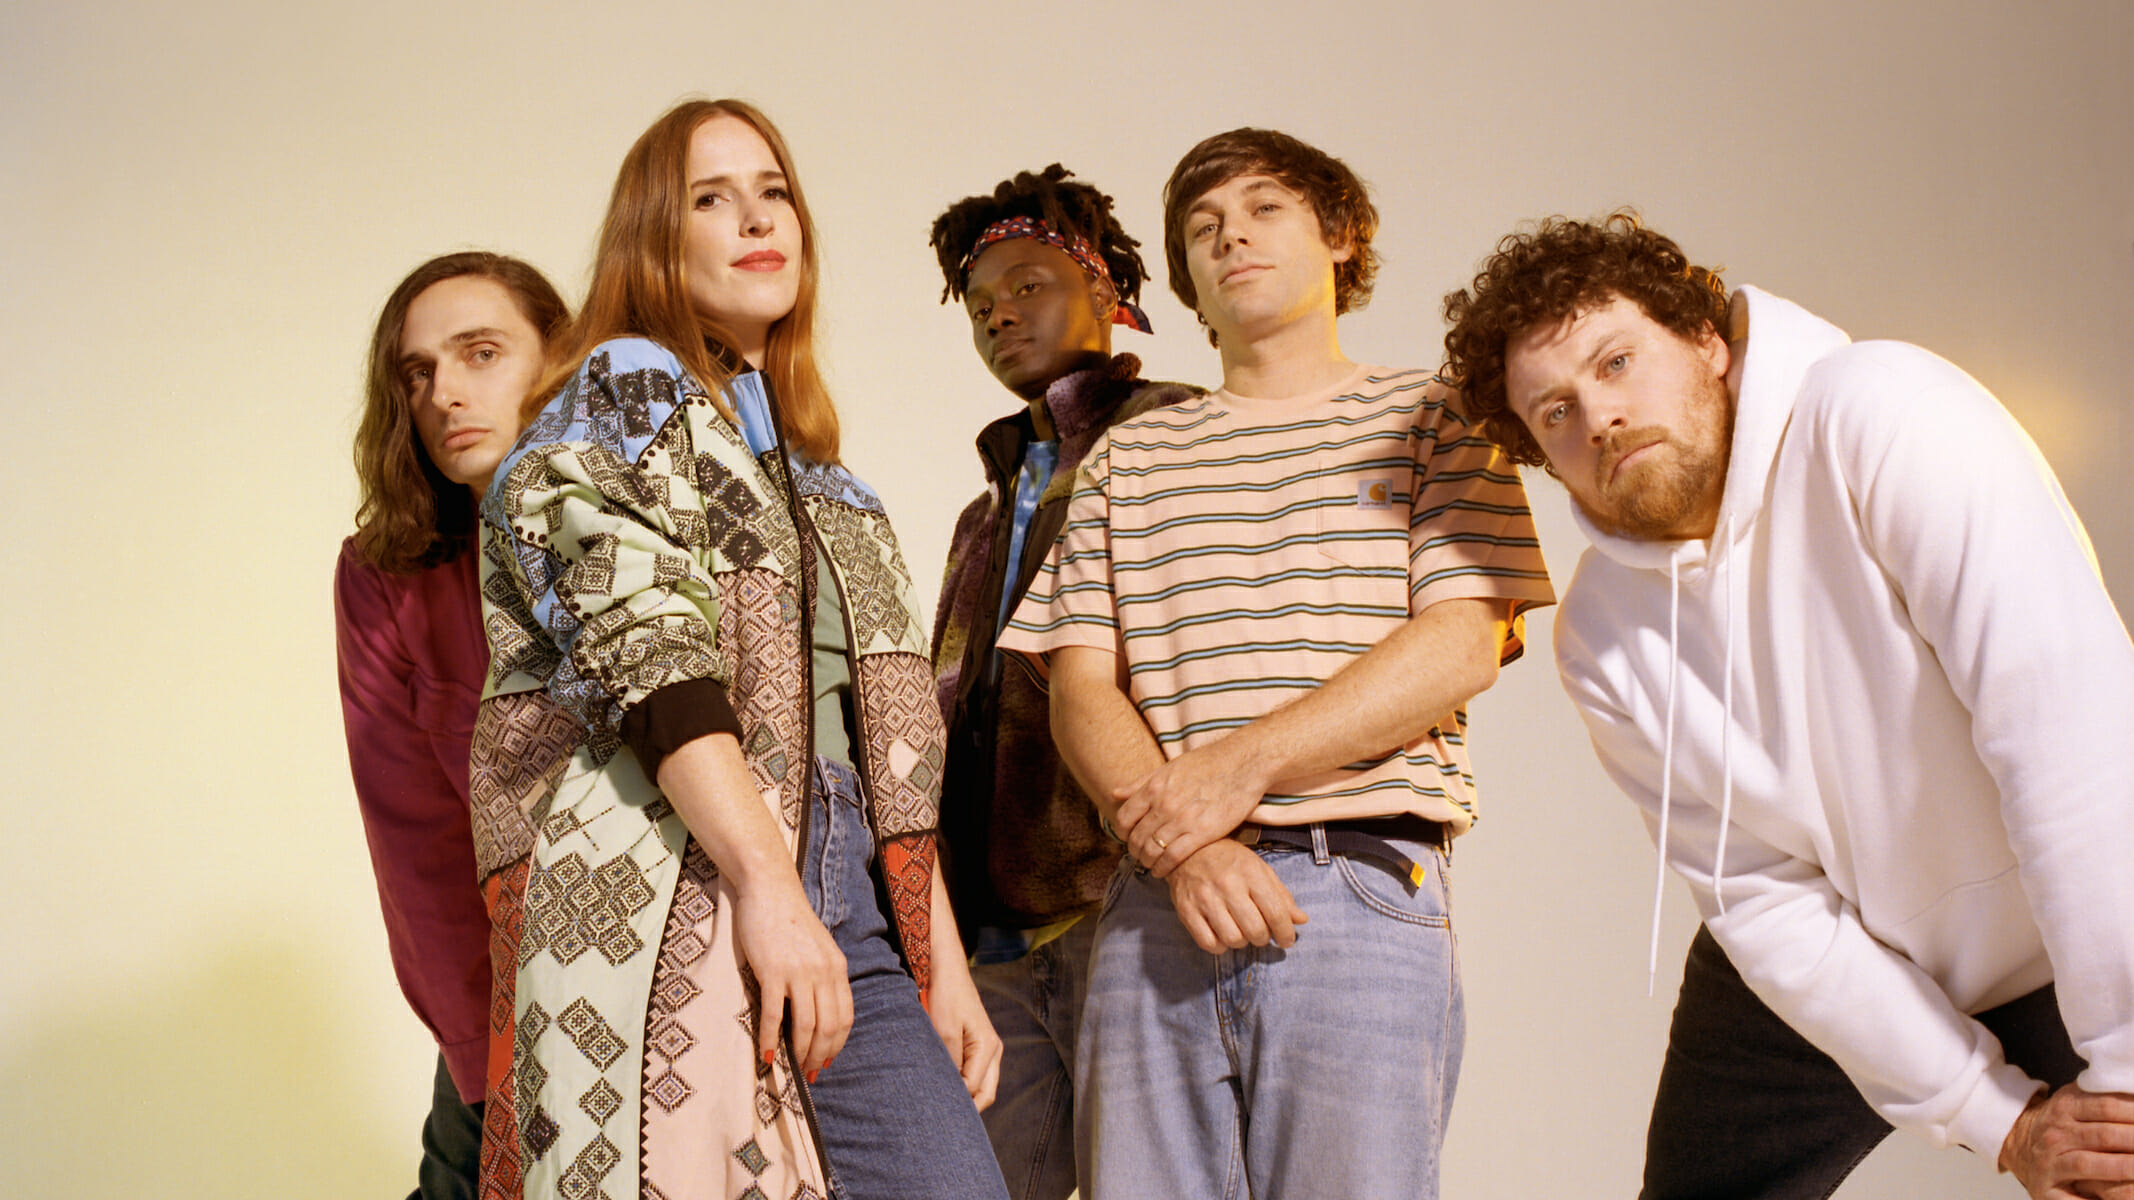 Joseph Mount is an In-Demand Songwriter and Producer, But It’s Still Metronomy Forever